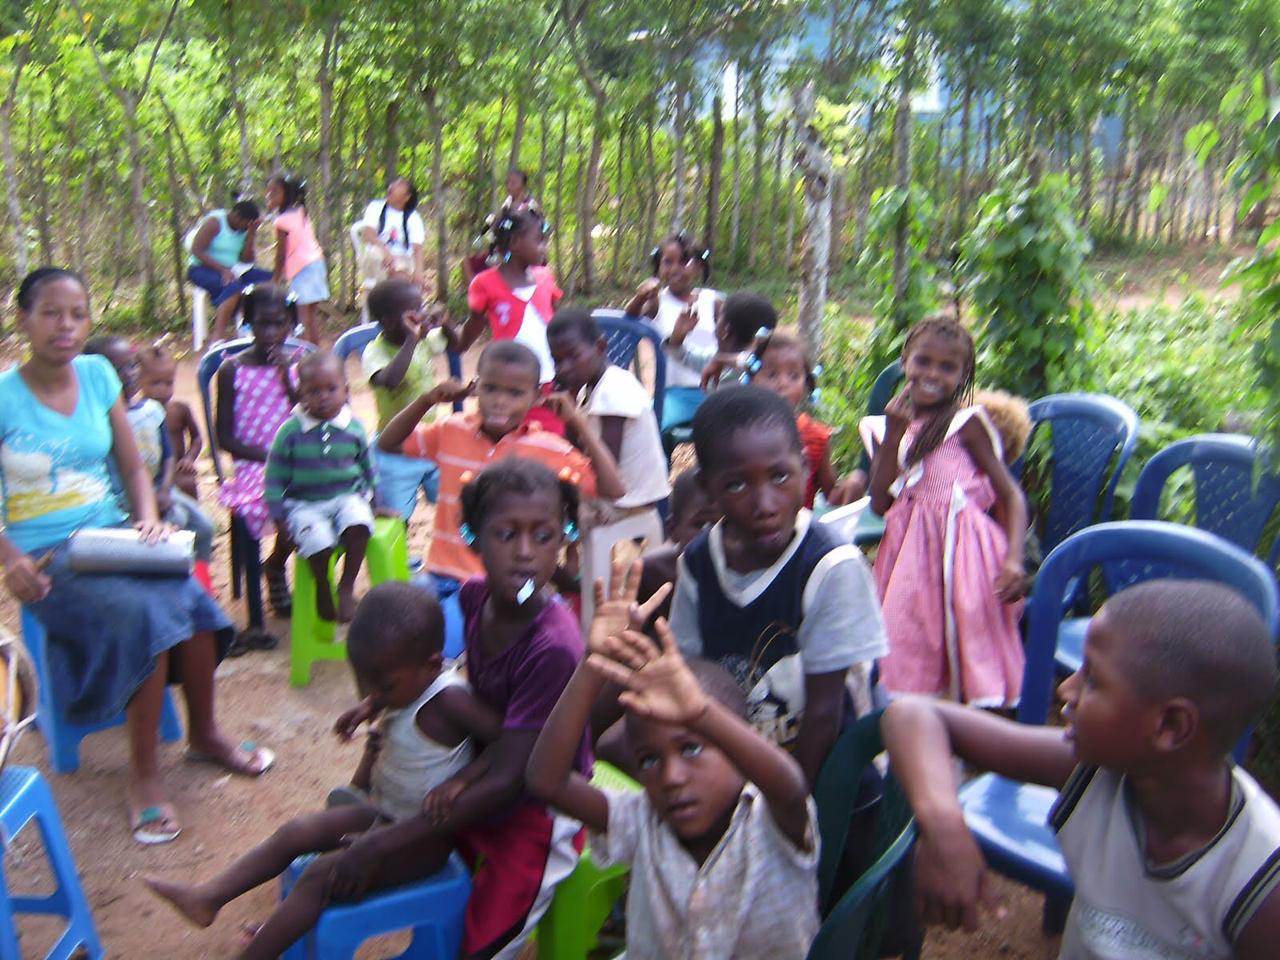 ¡Youth Pastor raises money and materials with Nation Fund for children in Dominican Republic!